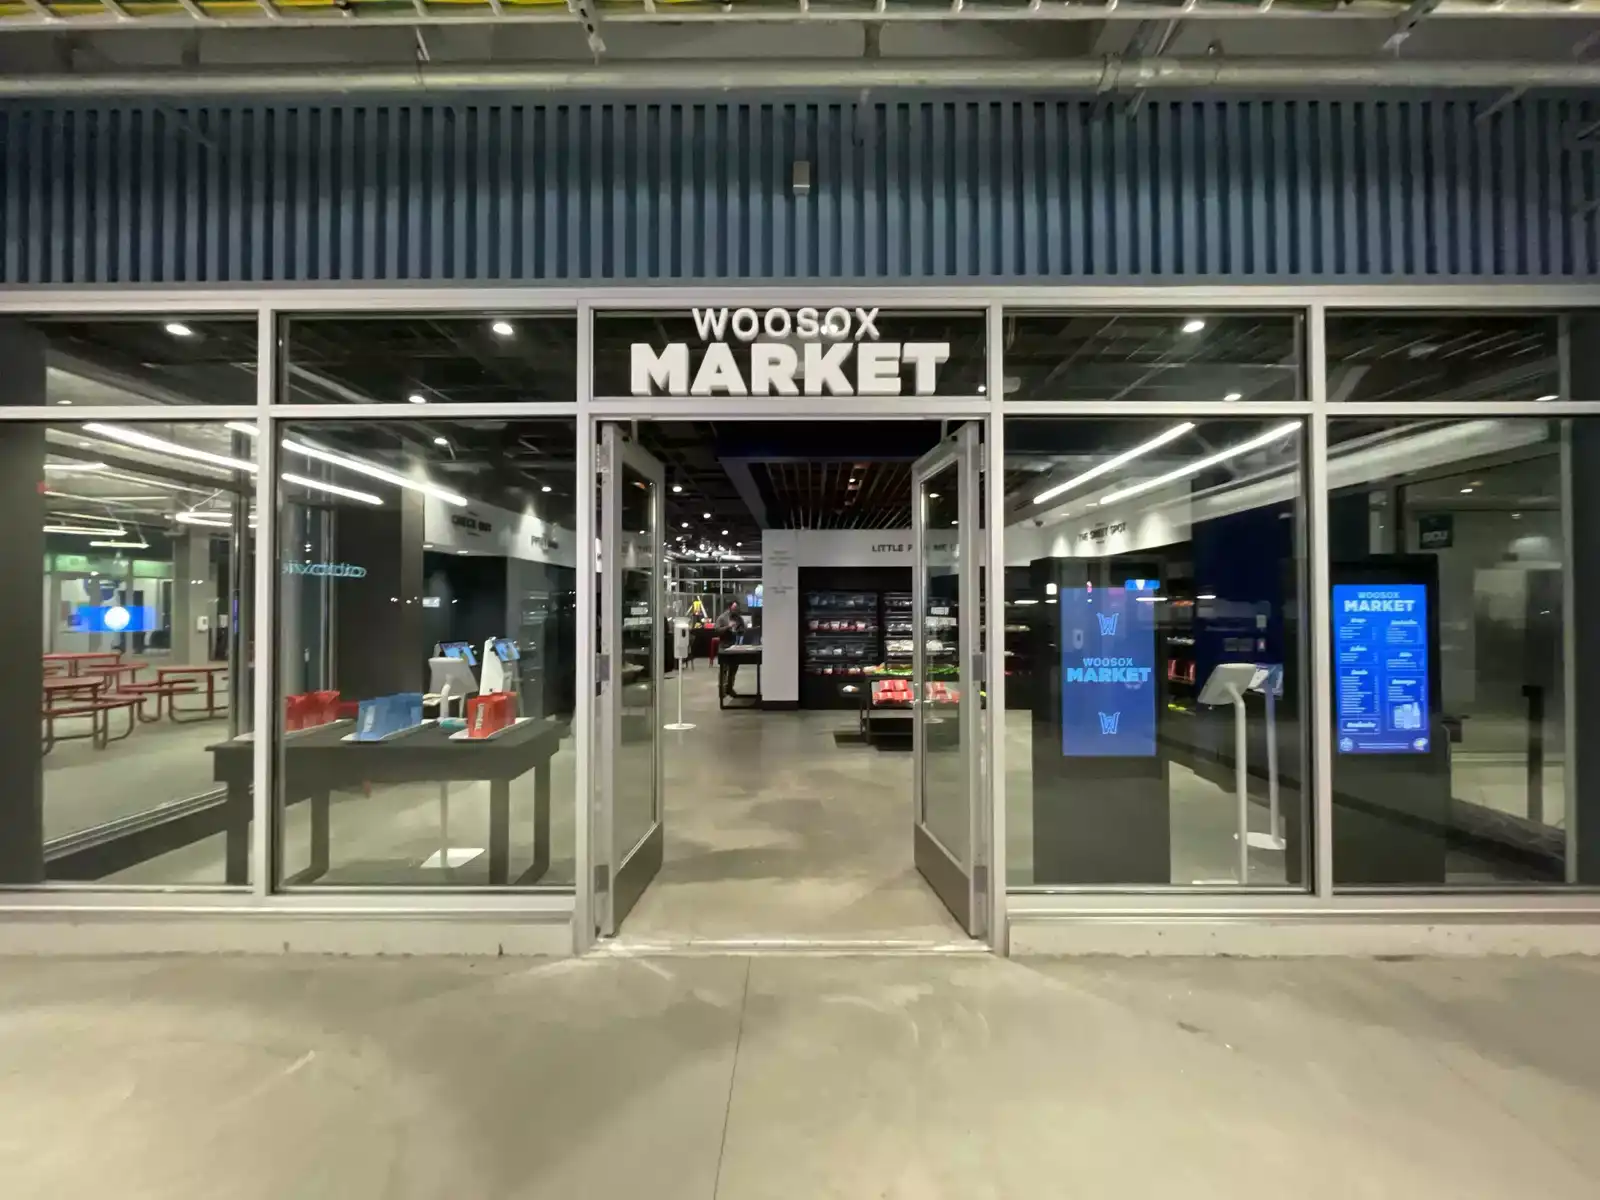 The Worcester Red Sox and Standard AI Open Next Phase of Polar Park's “ WooSox Market” – Introducing Baseball's First Autonomous Retail Experience